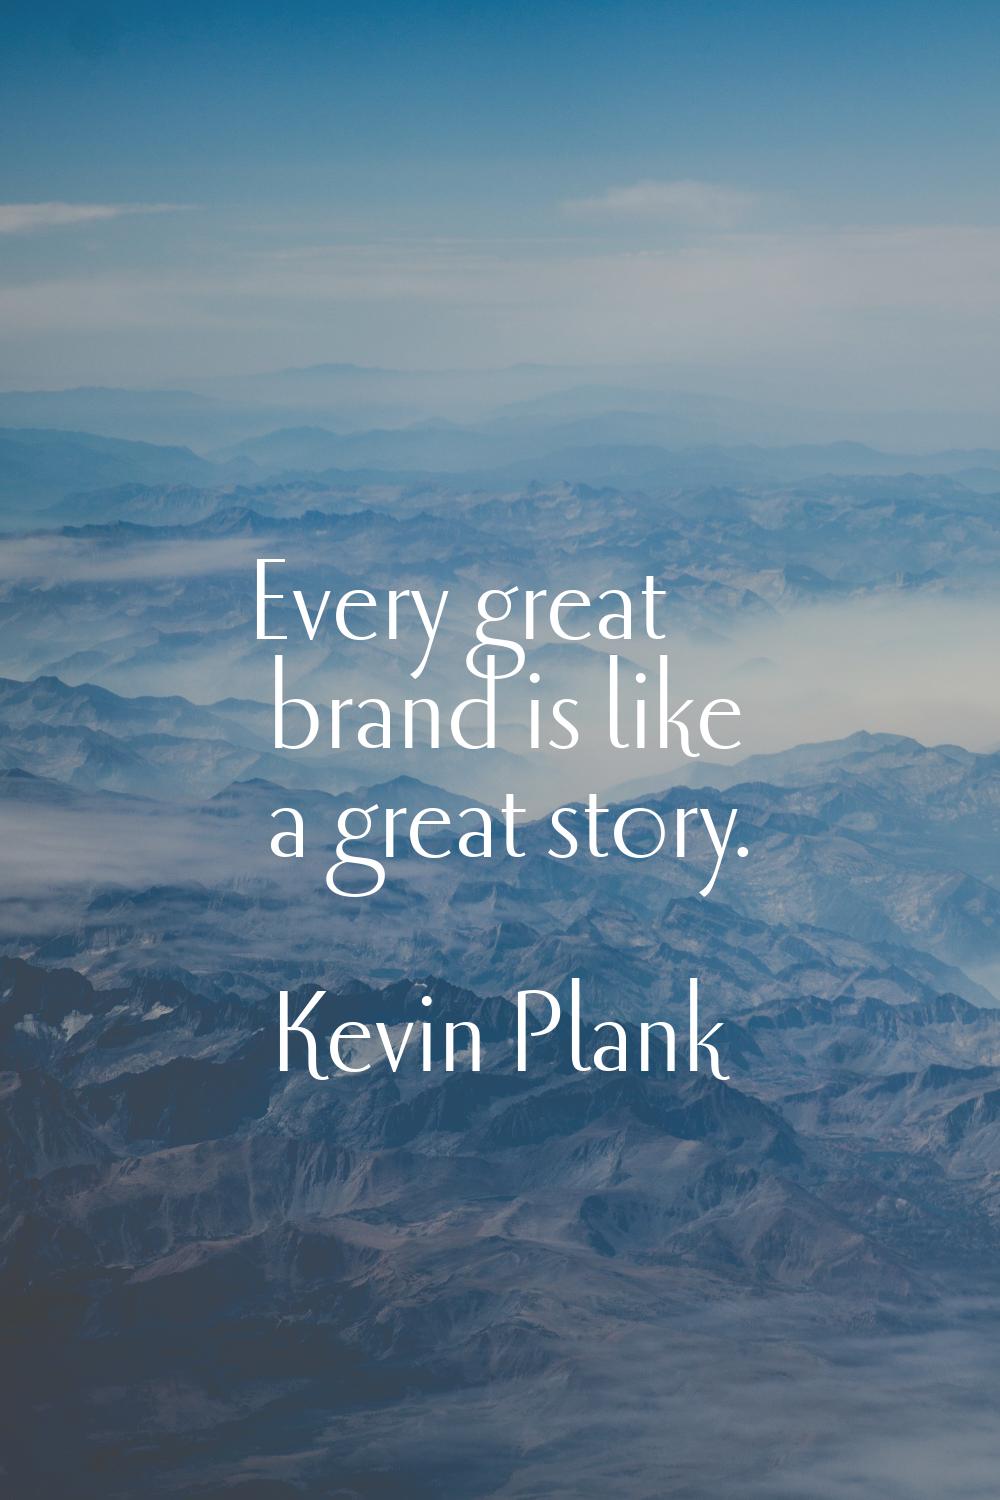 Every great brand is like a great story.